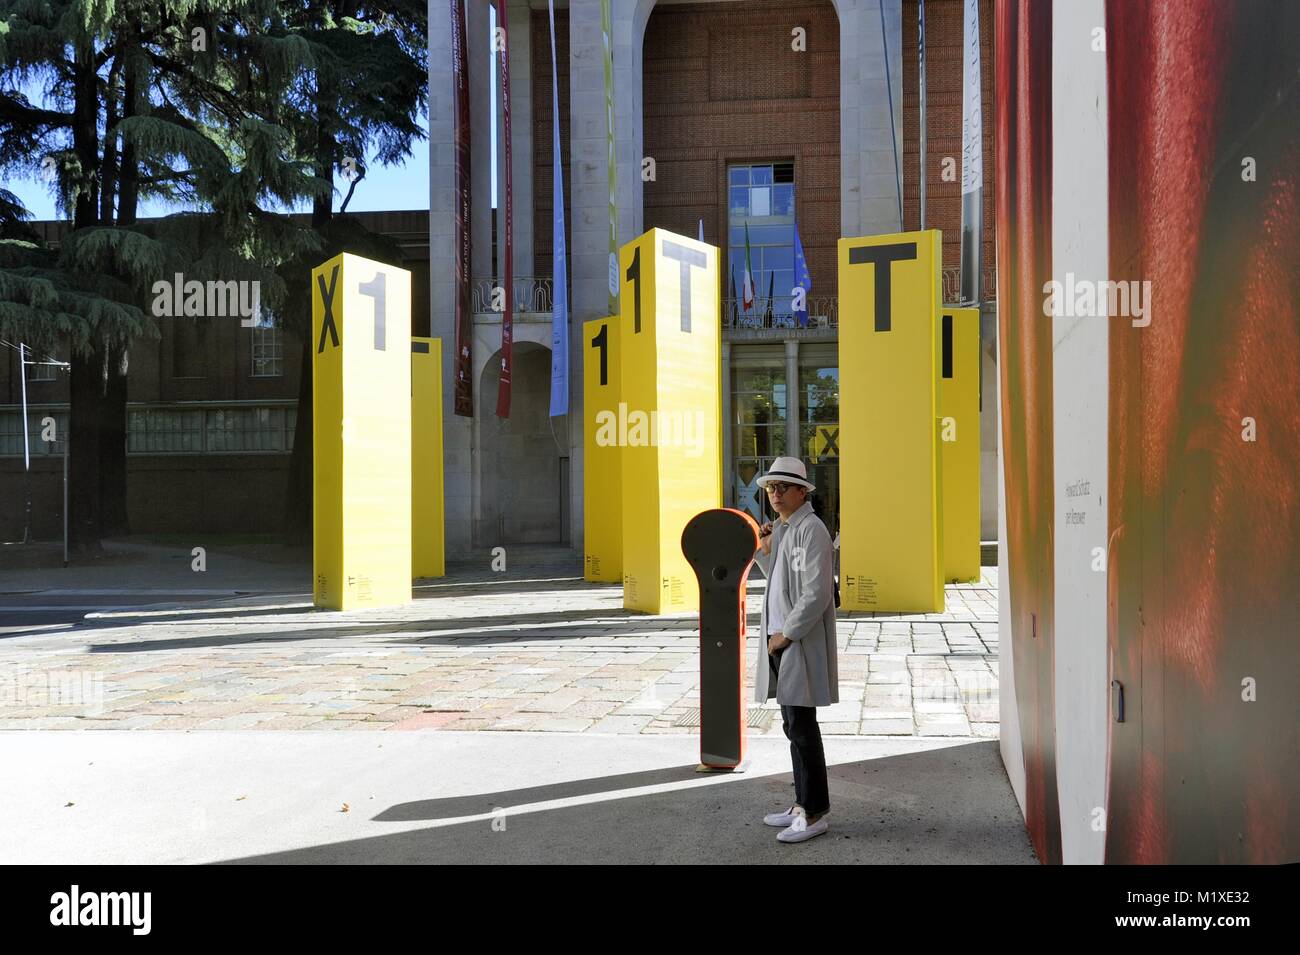 Milan (Italy), the palace of Triennale, gallery of arts and design Stock Photo